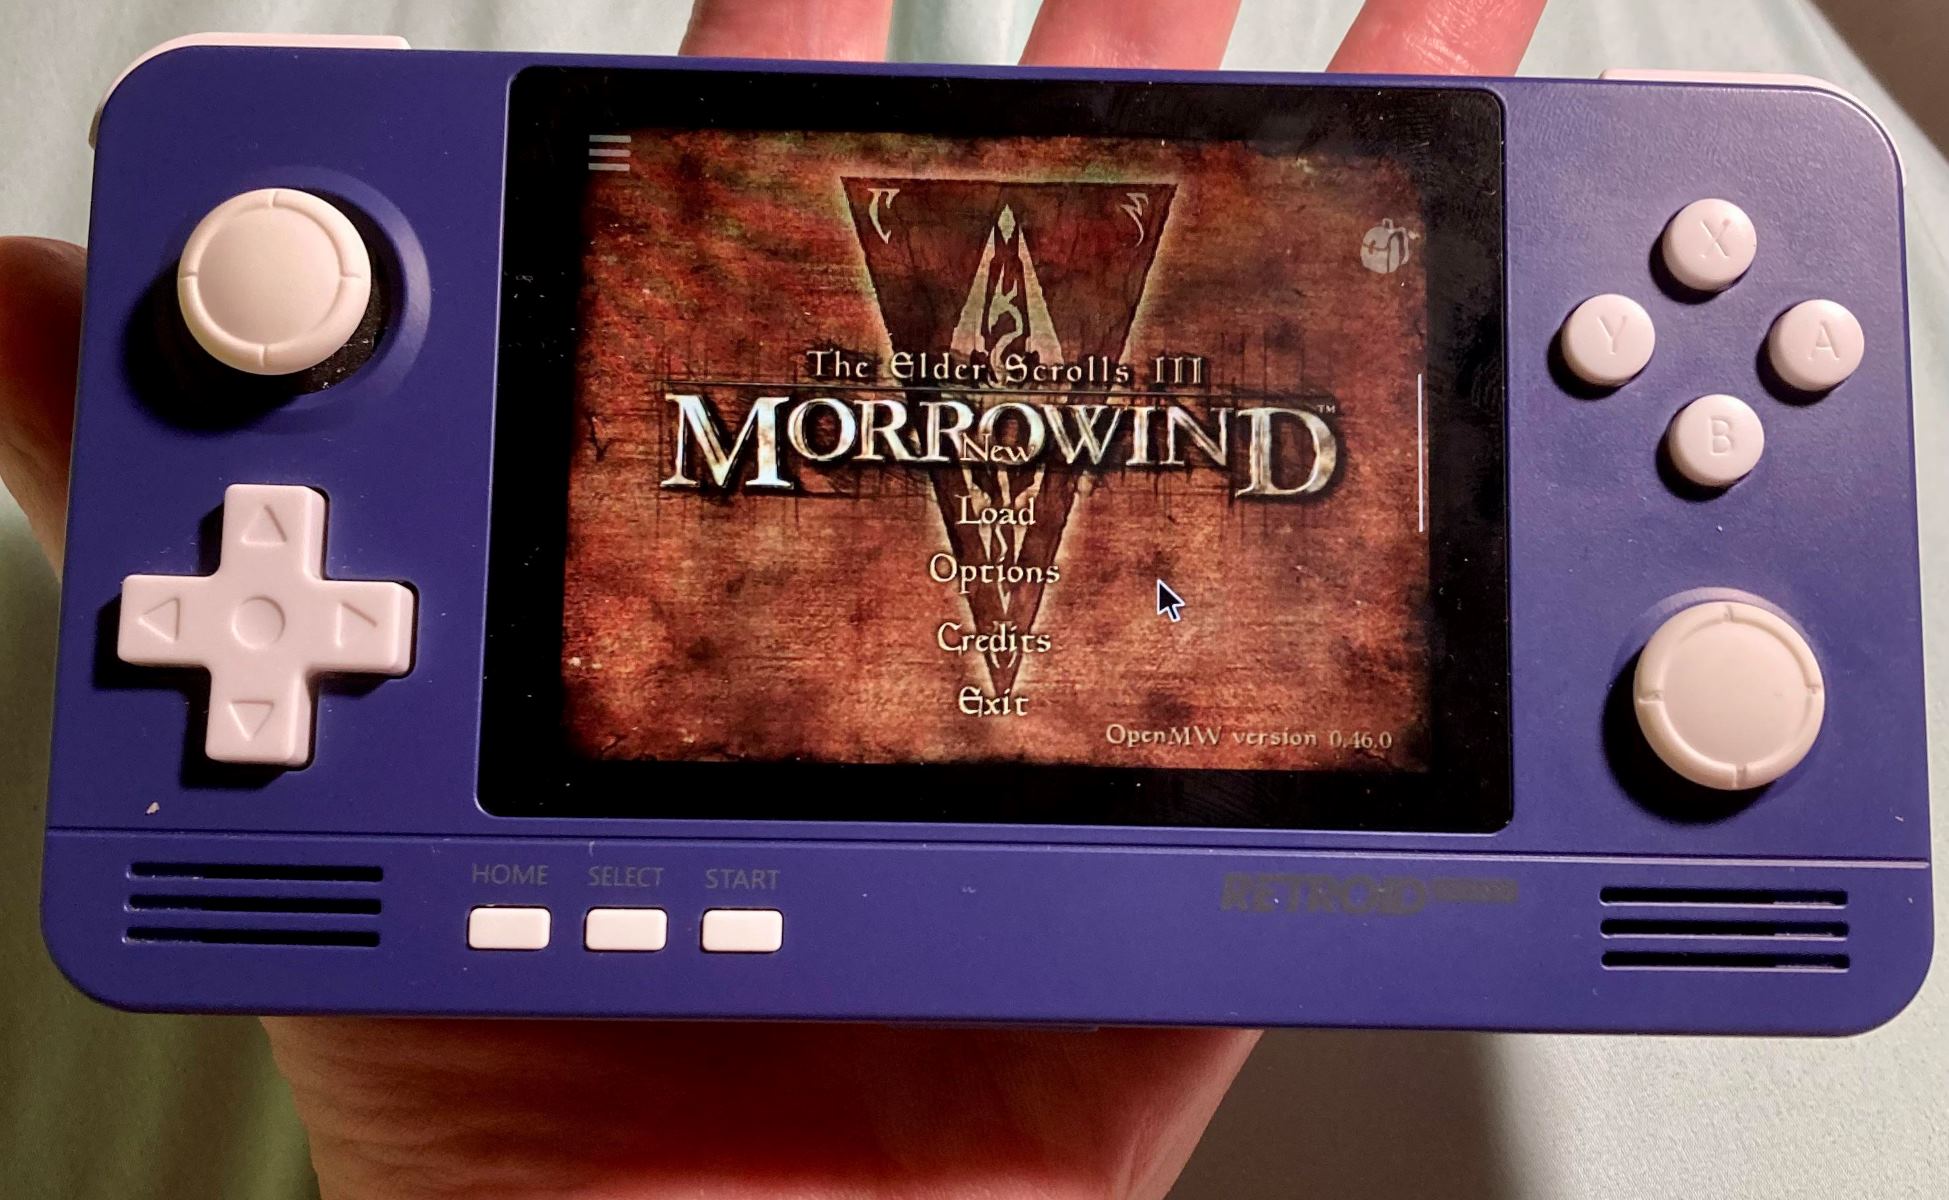 Troubleshooting Morrowind: Gamepad Connection Issues